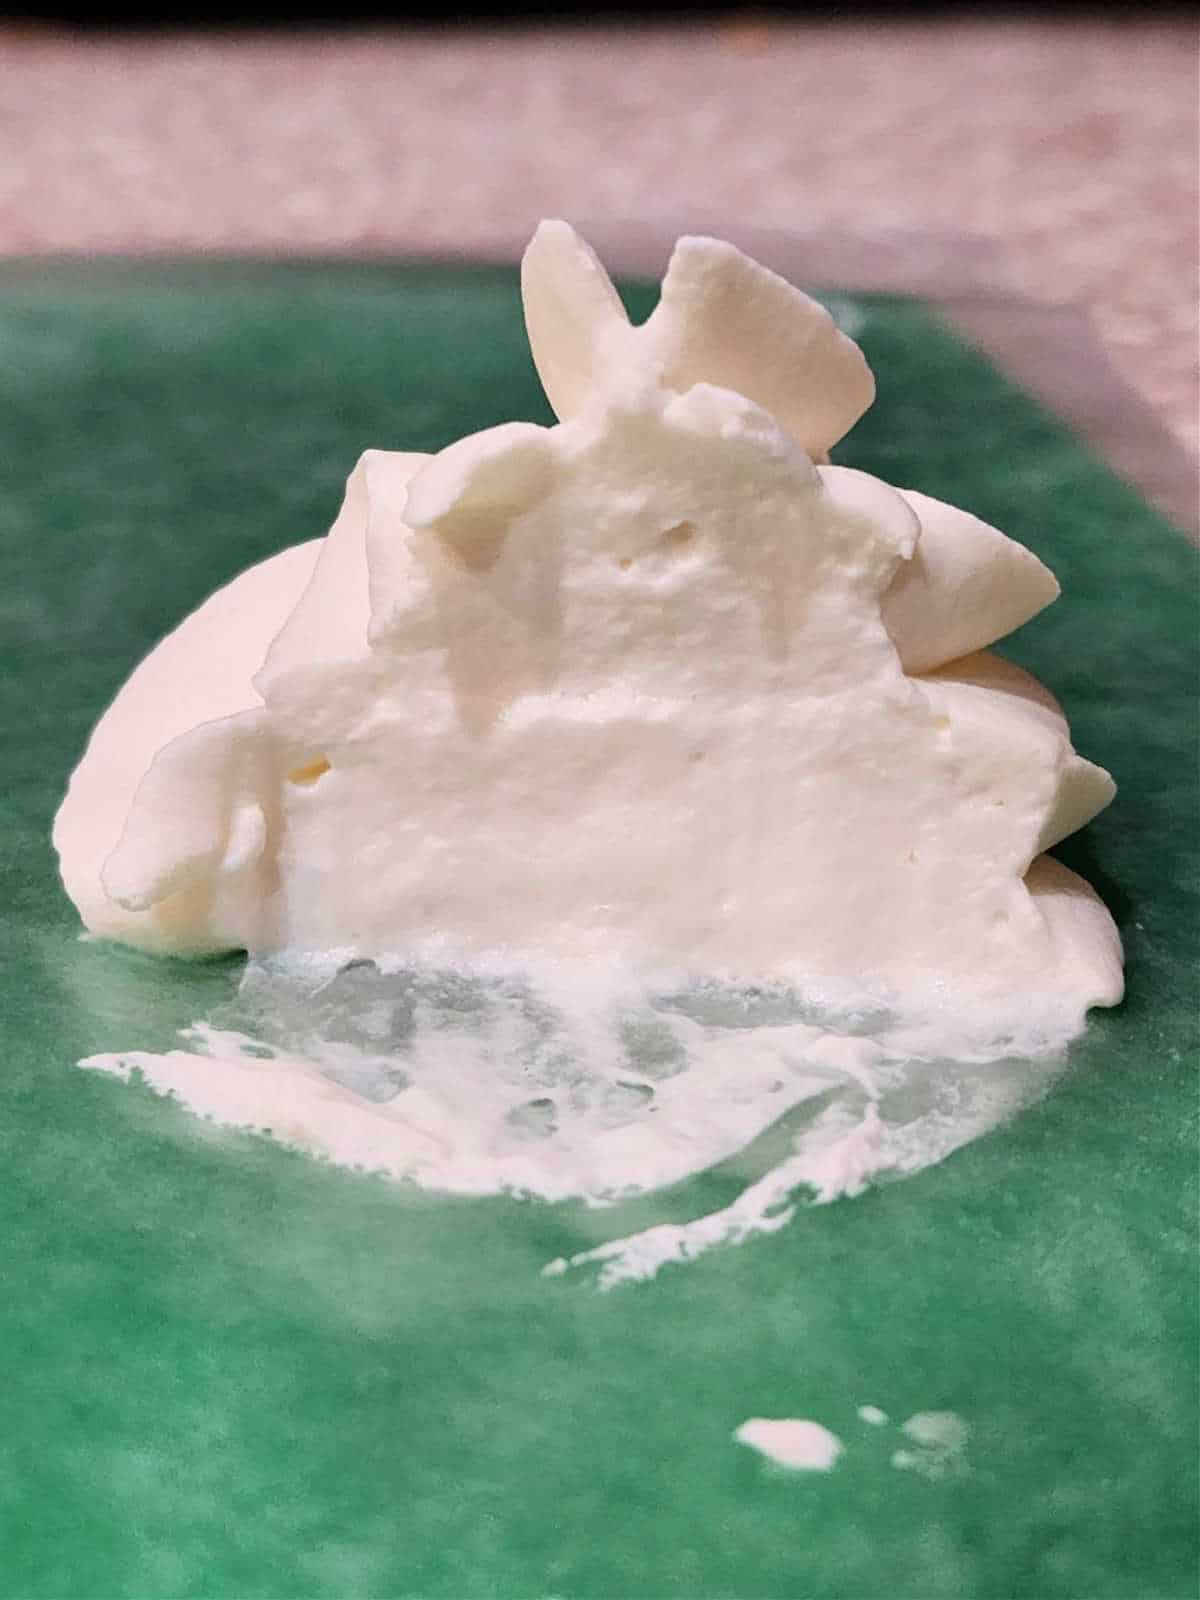 Piped whipped cream sliced in two to show the inside texture: smooth and creamy.